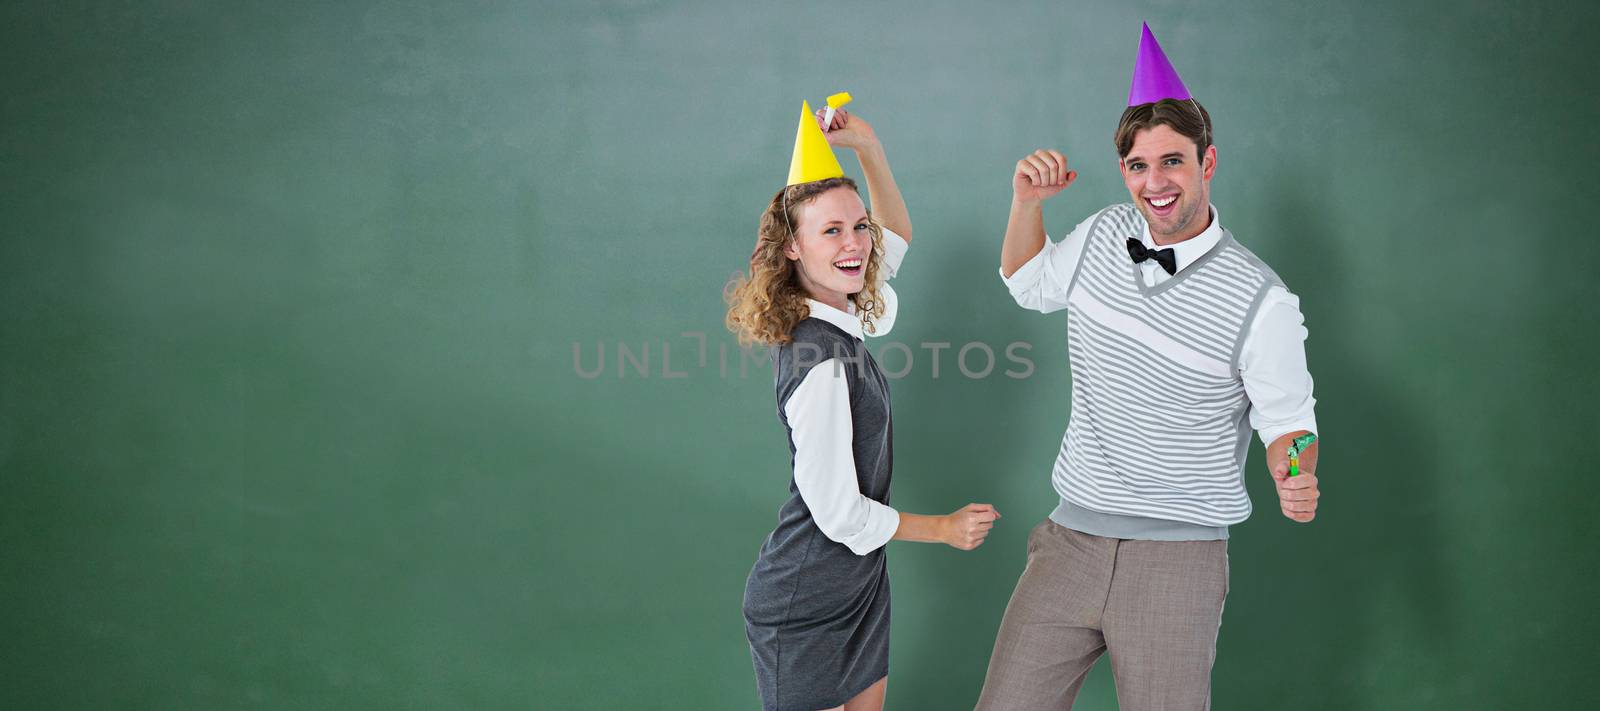 Geeky couple dancing with party hat  against green chalkboard